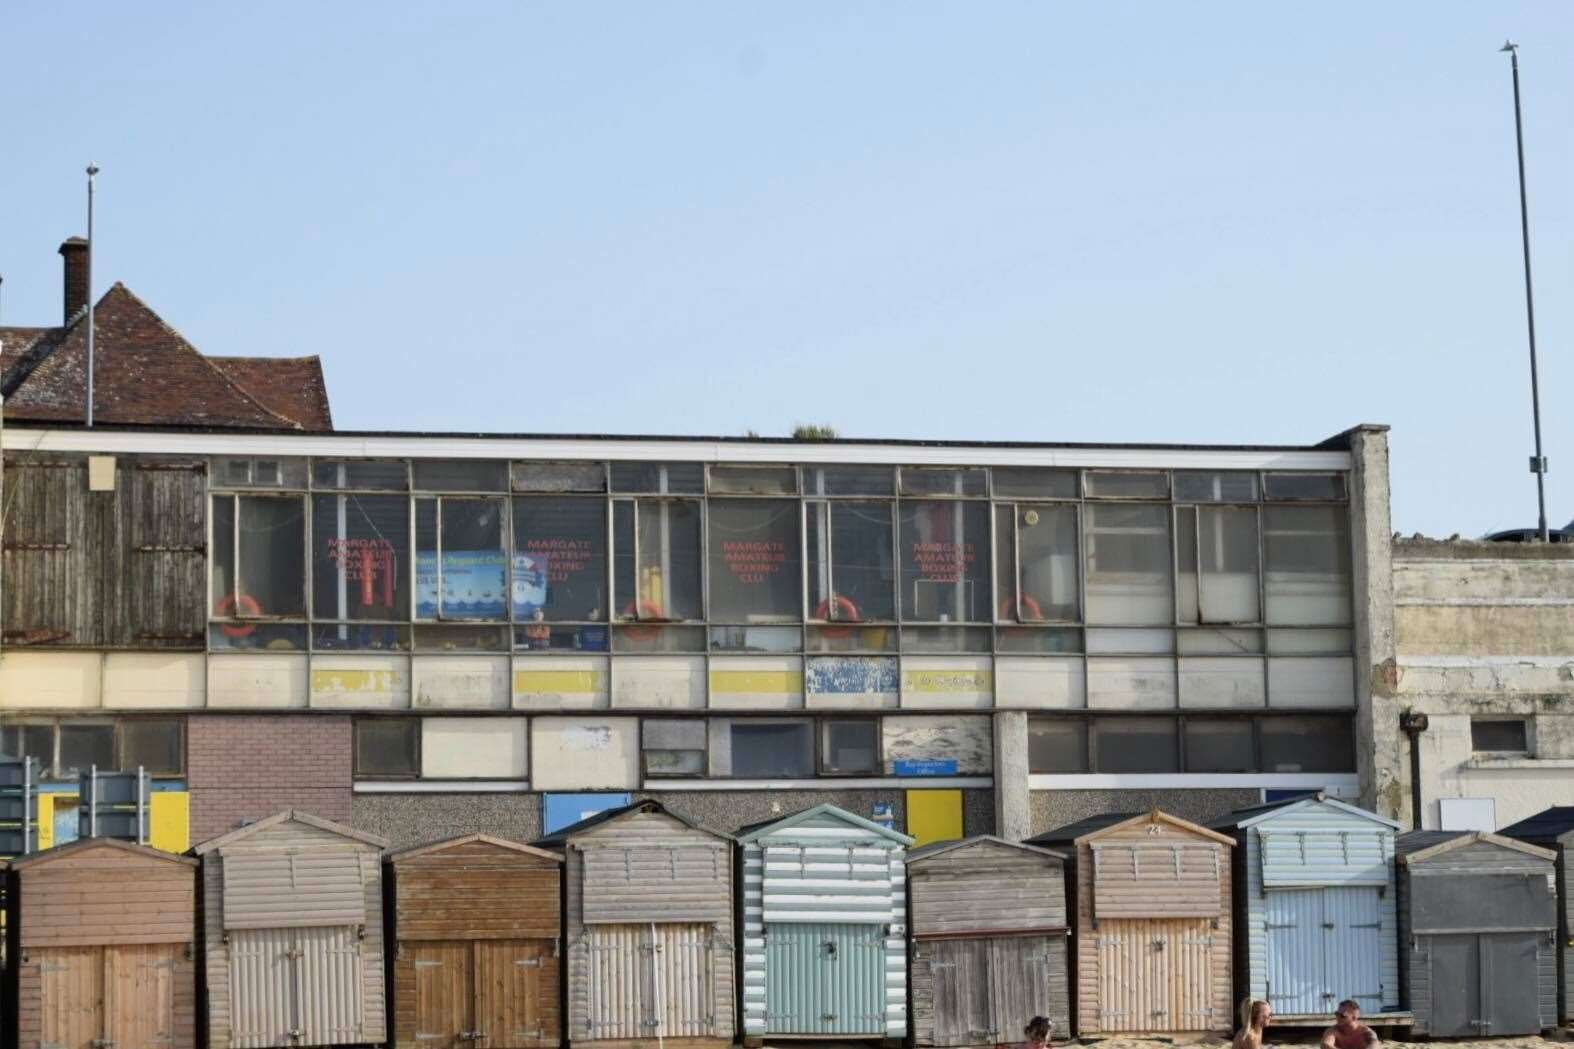 The cash-strapped council cannot afford to redevelop the site. Pic: Roberto Fabiani